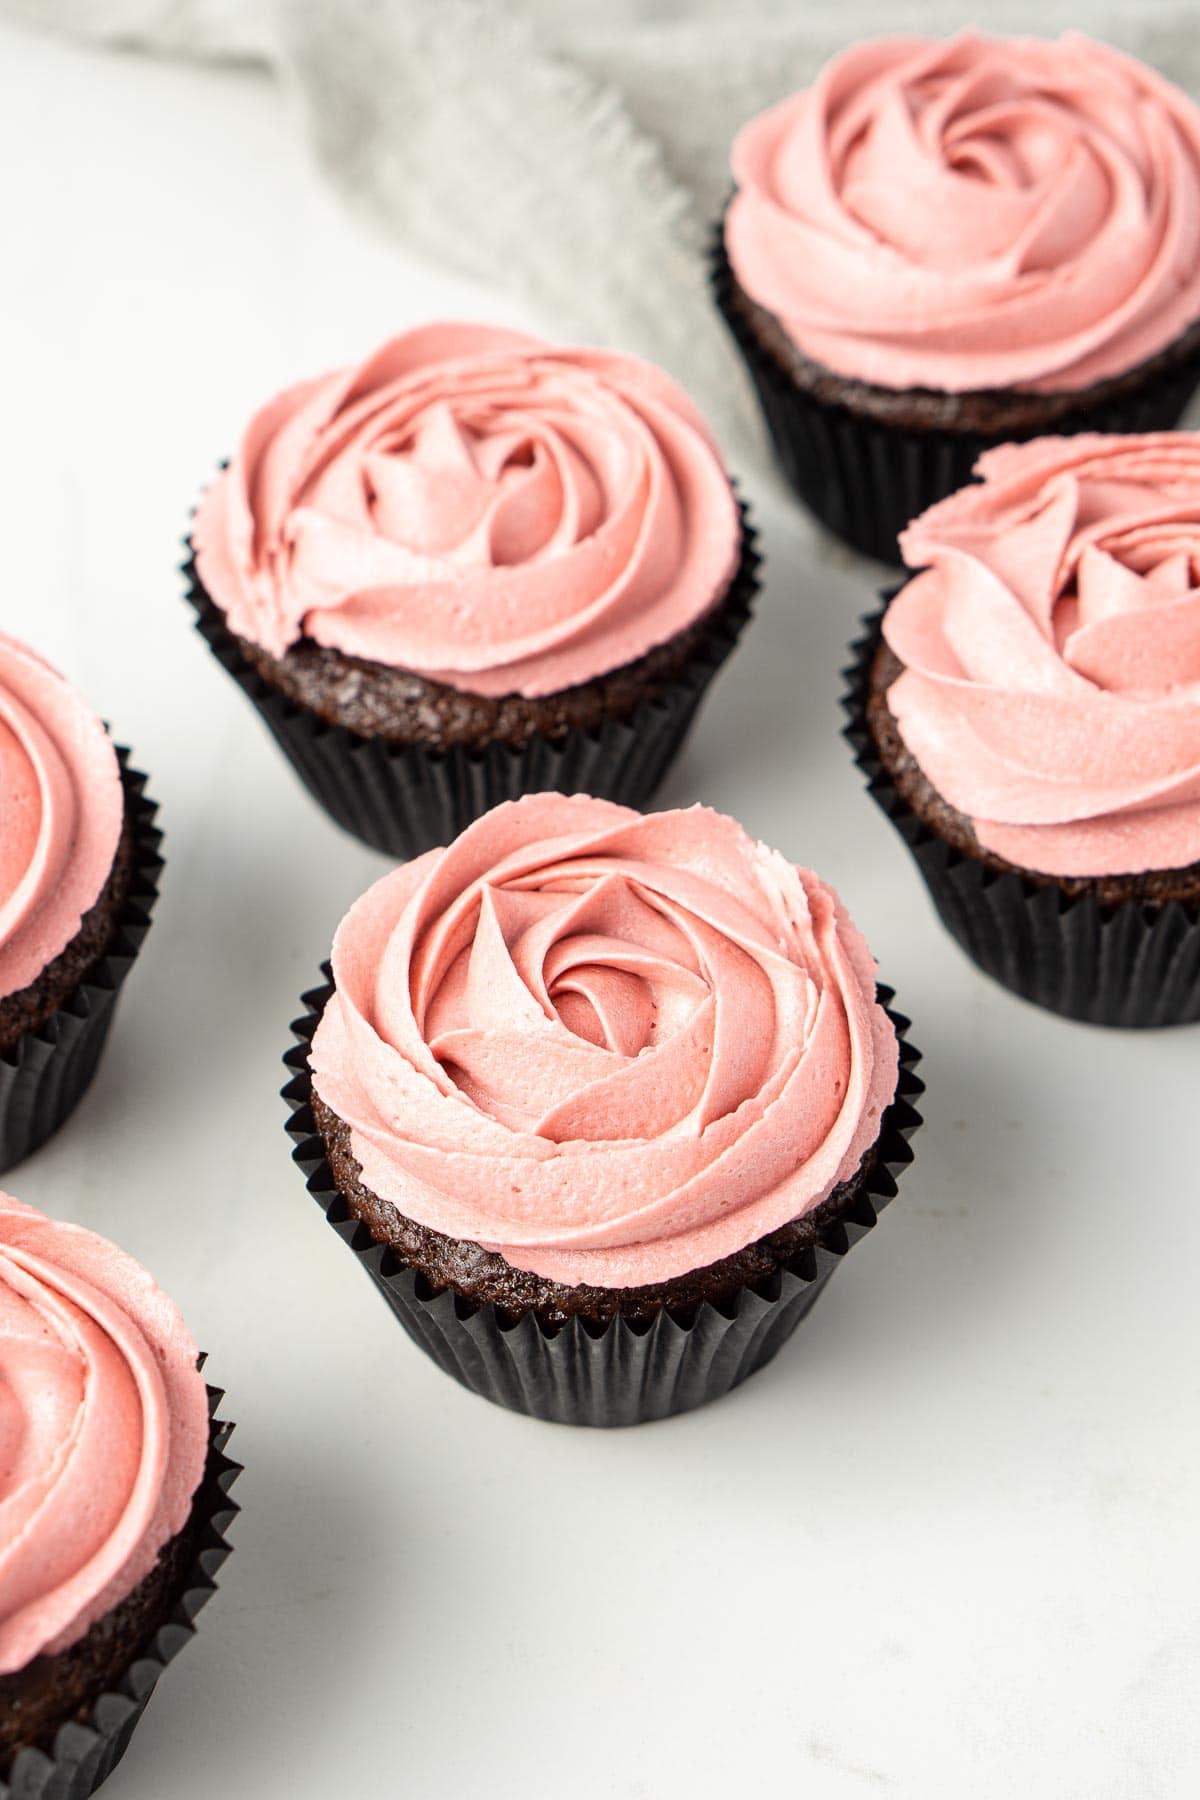 Close up of chocolate cupcakes with vegan vanilla buttercream roses piped on top.